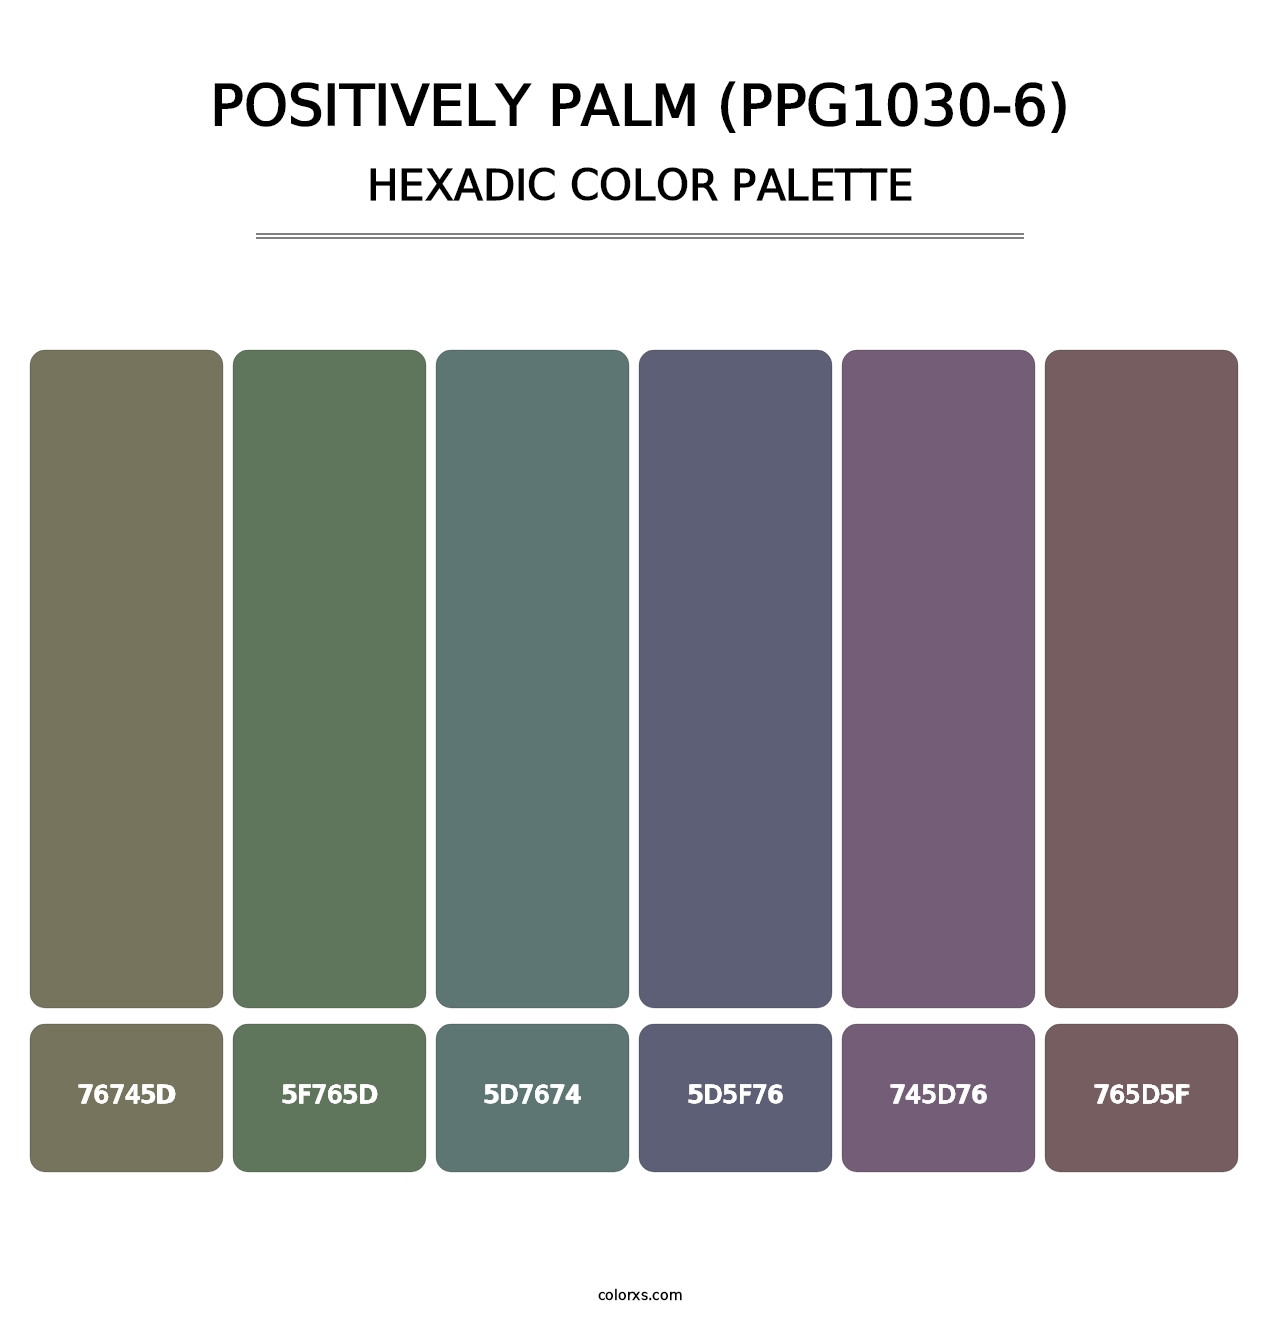 Positively Palm (PPG1030-6) - Hexadic Color Palette